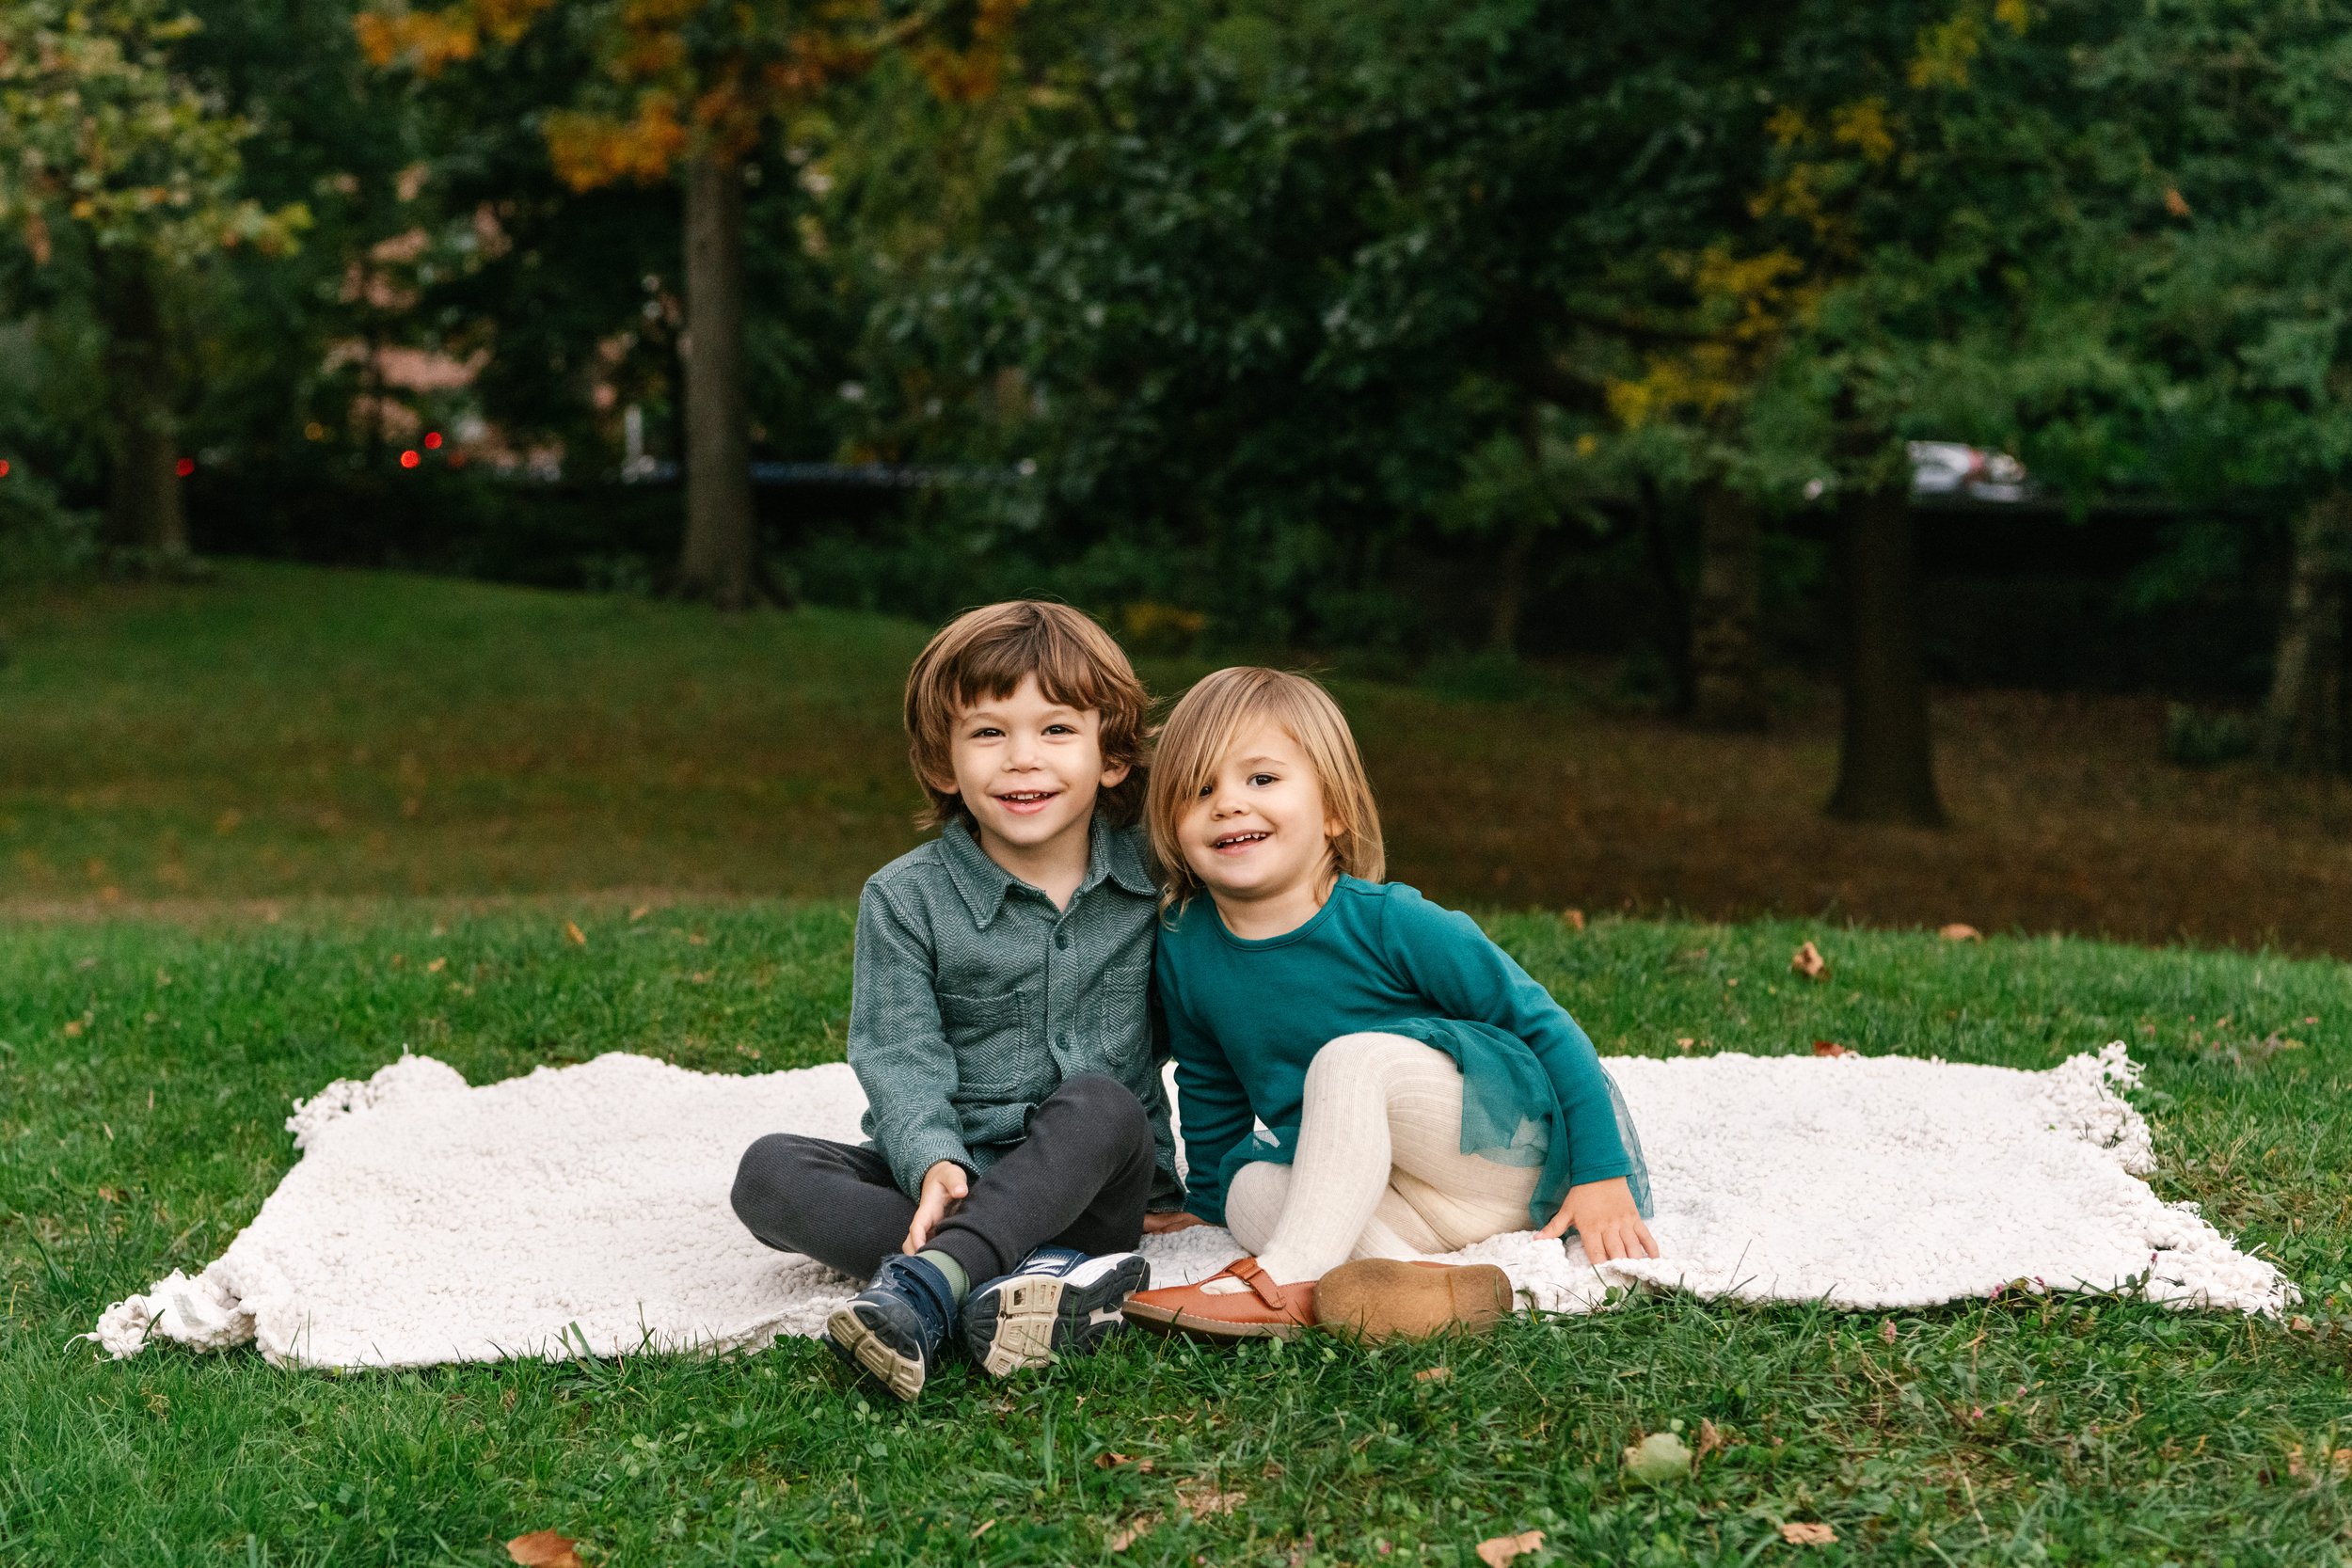  A brother and sister portrait taken in Central Park by Nicole Hawkins Photography in New York City. sibling fall family portraits outdoor leaf portrait #NicoleHawkinsPhotography #NicoleHawkinsFamilies #NJphotographers #familyphotos #CentralParkPhoto